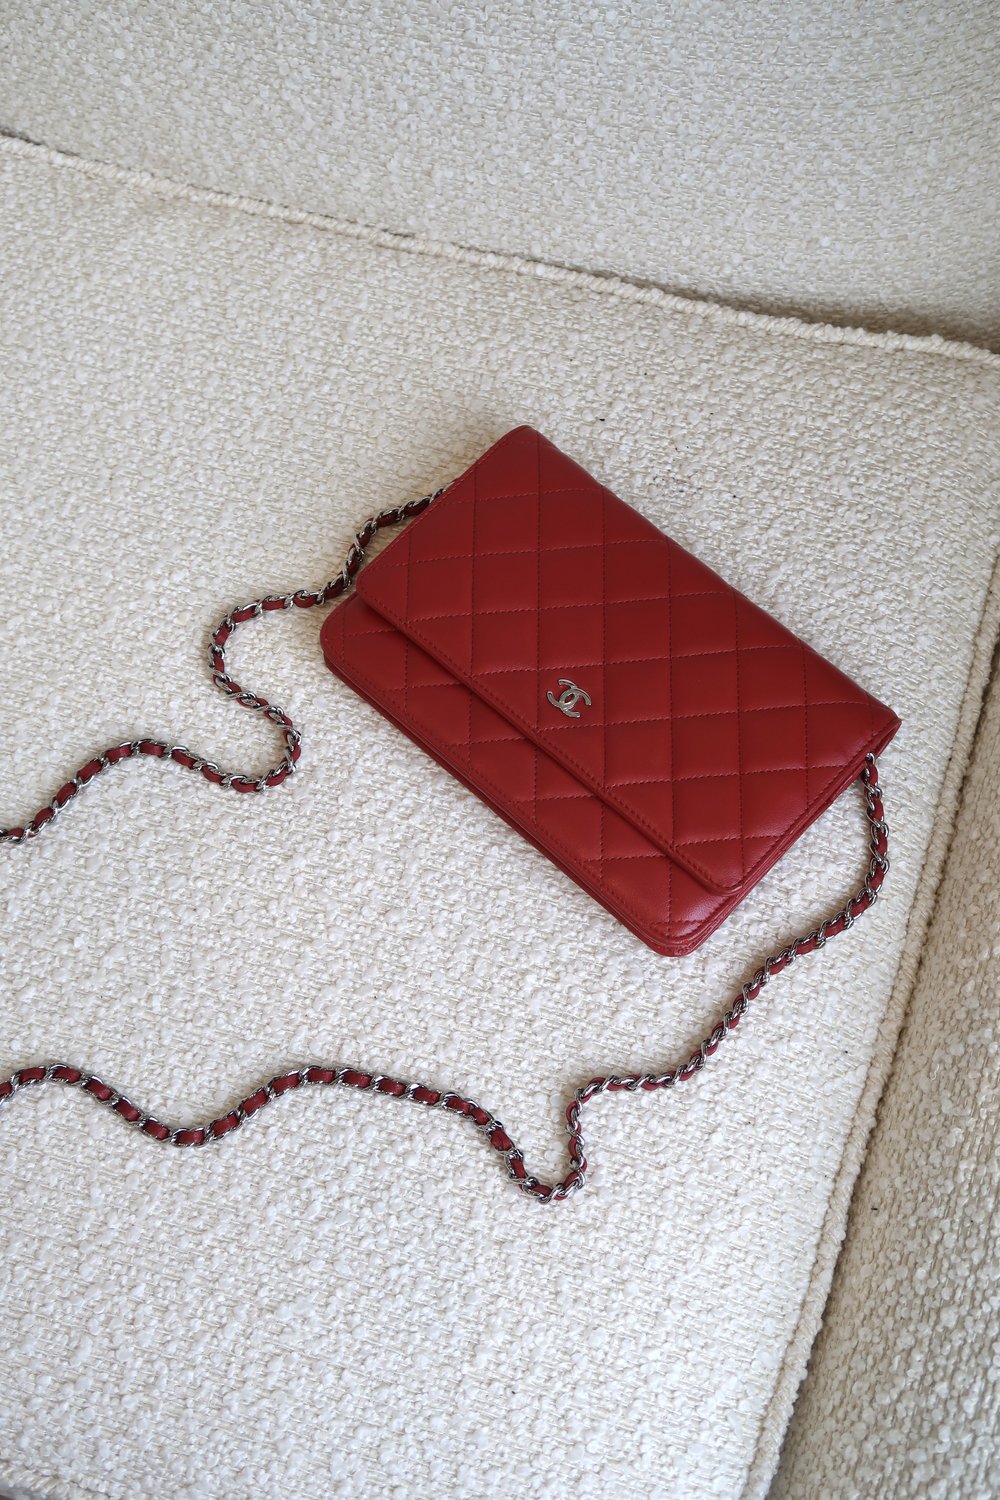 Chanel Red WOC 19 series; 2014 — Blaise Ruby Loves